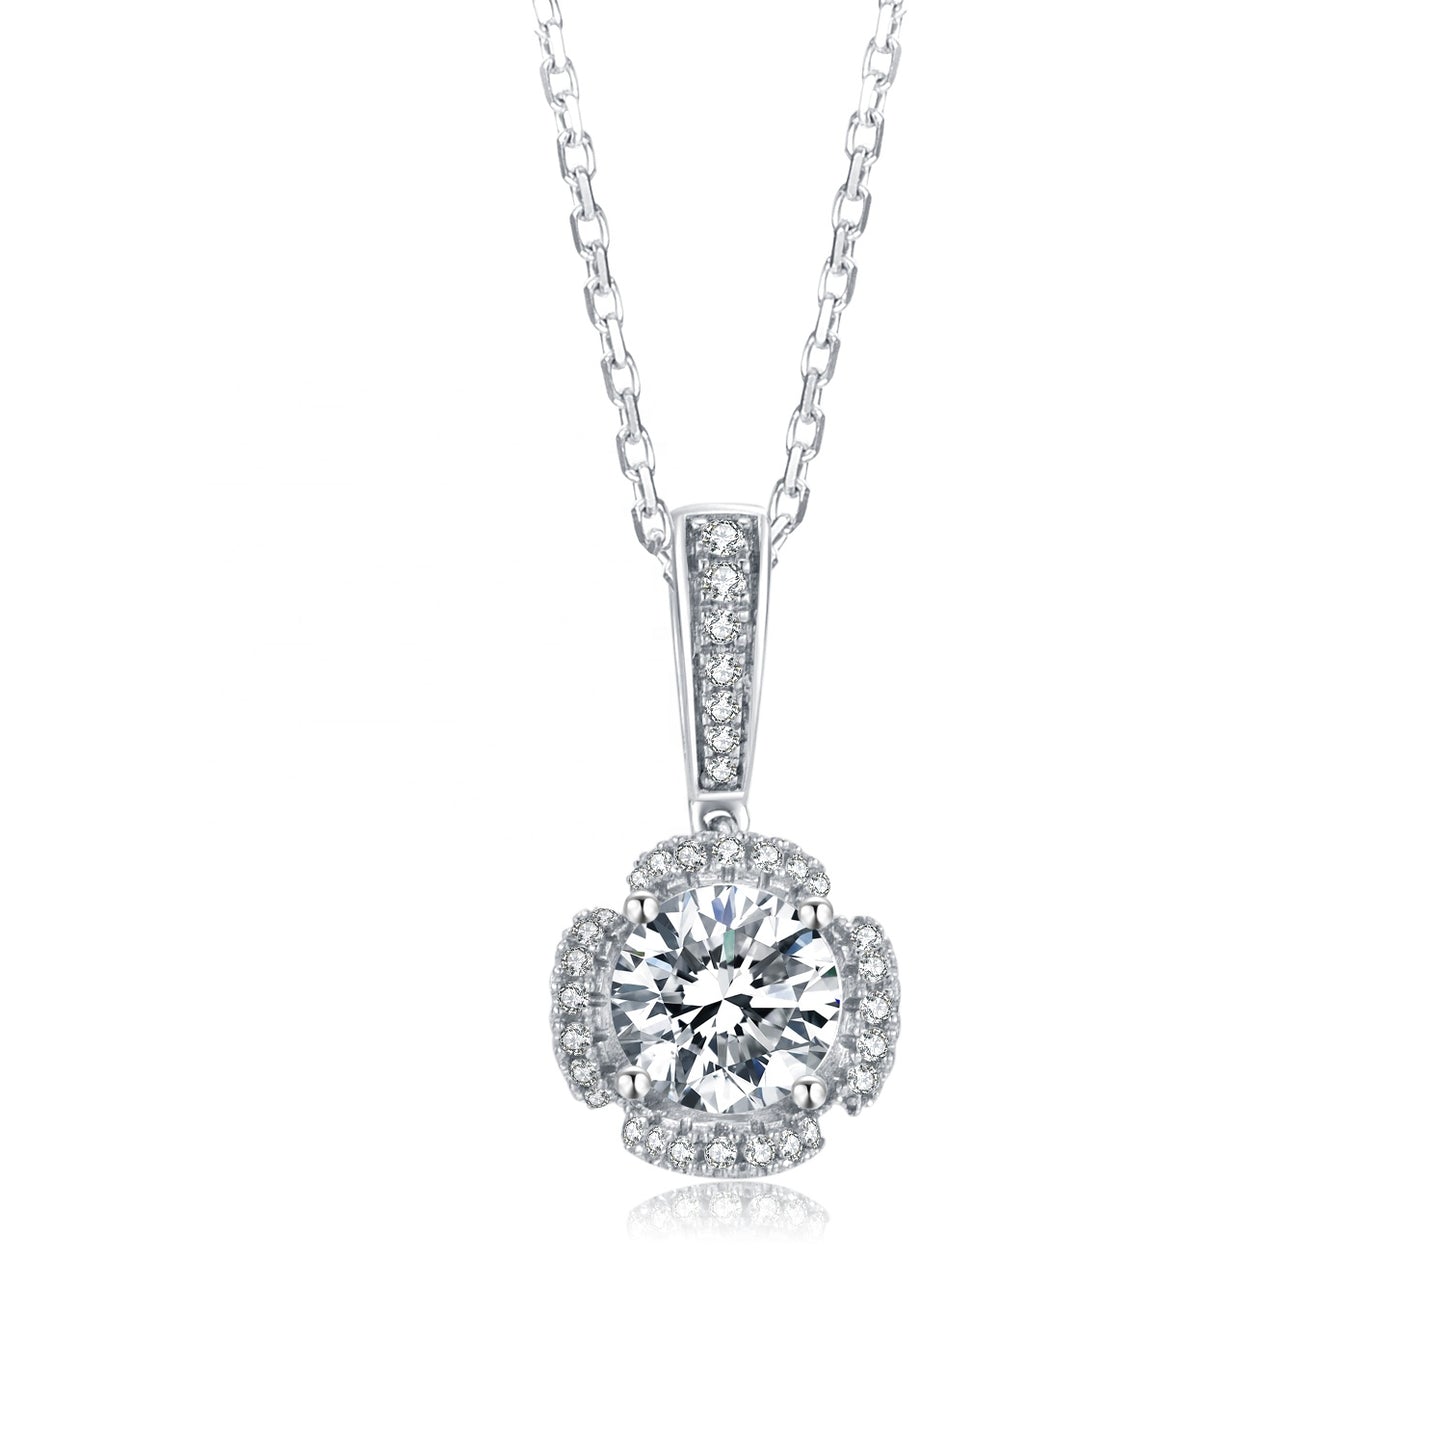 Halo 1.00ct Moissanite Pendant Set in Sterling Silver